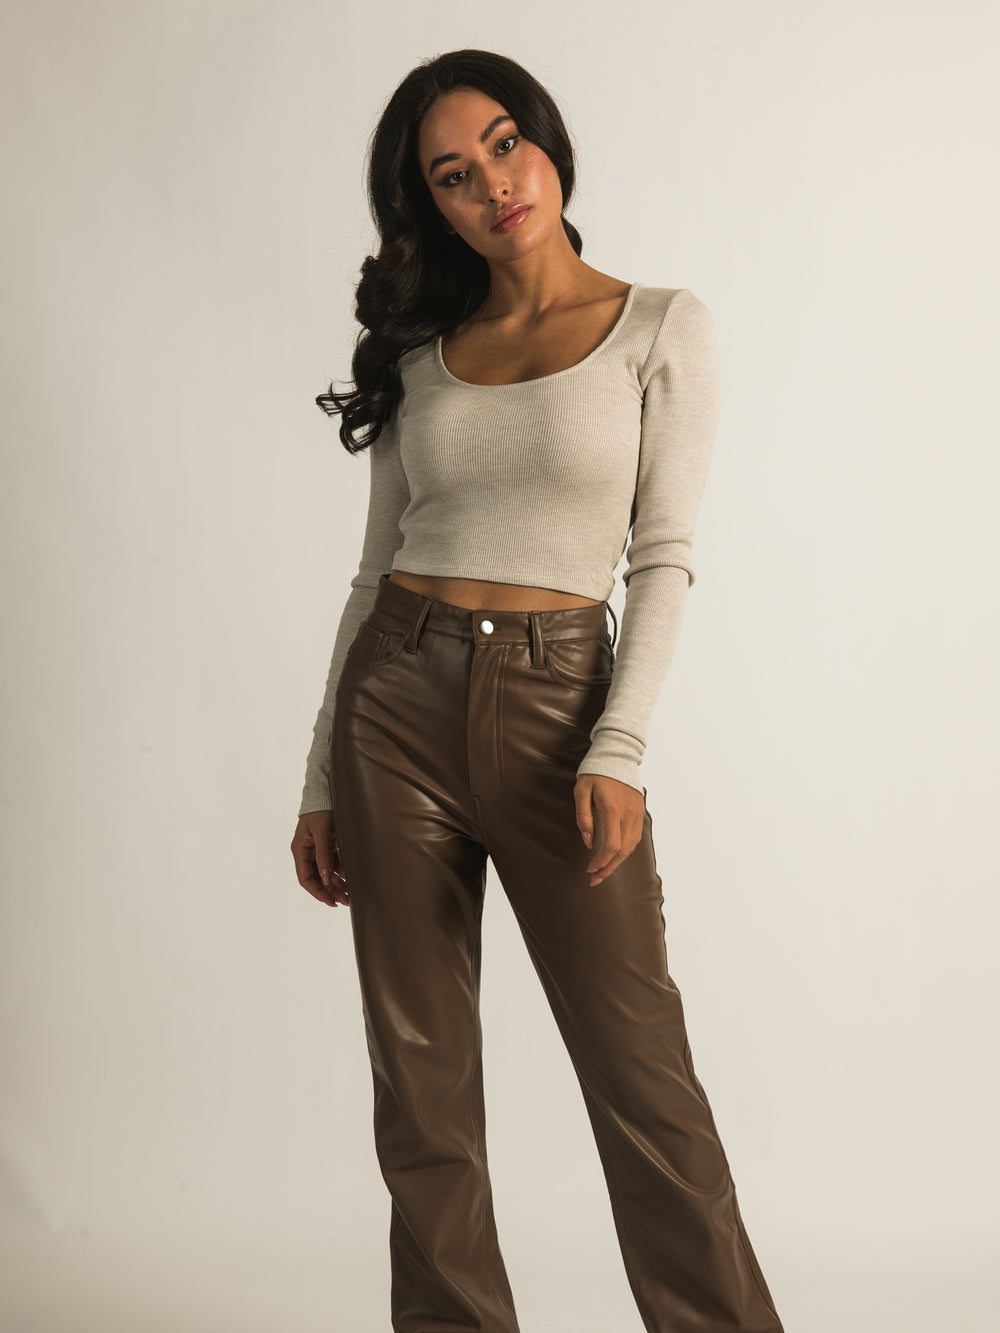 BUYING BROWN LEATHER PANTS?